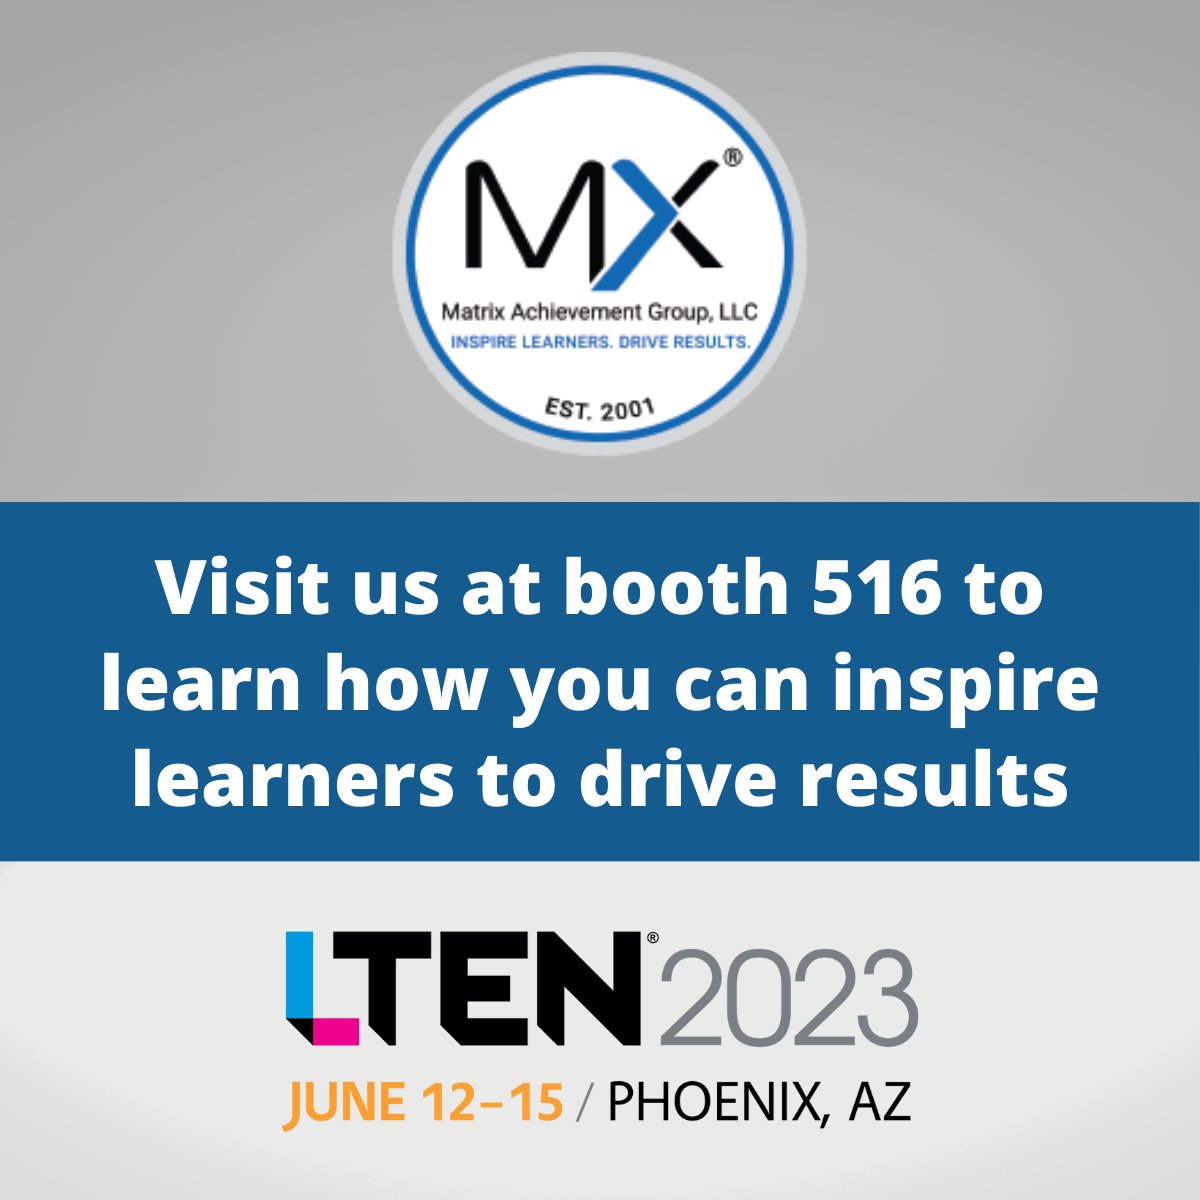 We're excited to attend #LTEN2023 next week in Phoenix. Stop by our booth #516 to meet our trainers and learn how you can get certified in the latest strategies of modern selling. #LTEN2023 #HighROI #LearningAndDevelopment #FocusForward ow.ly/efGm50OGOvu